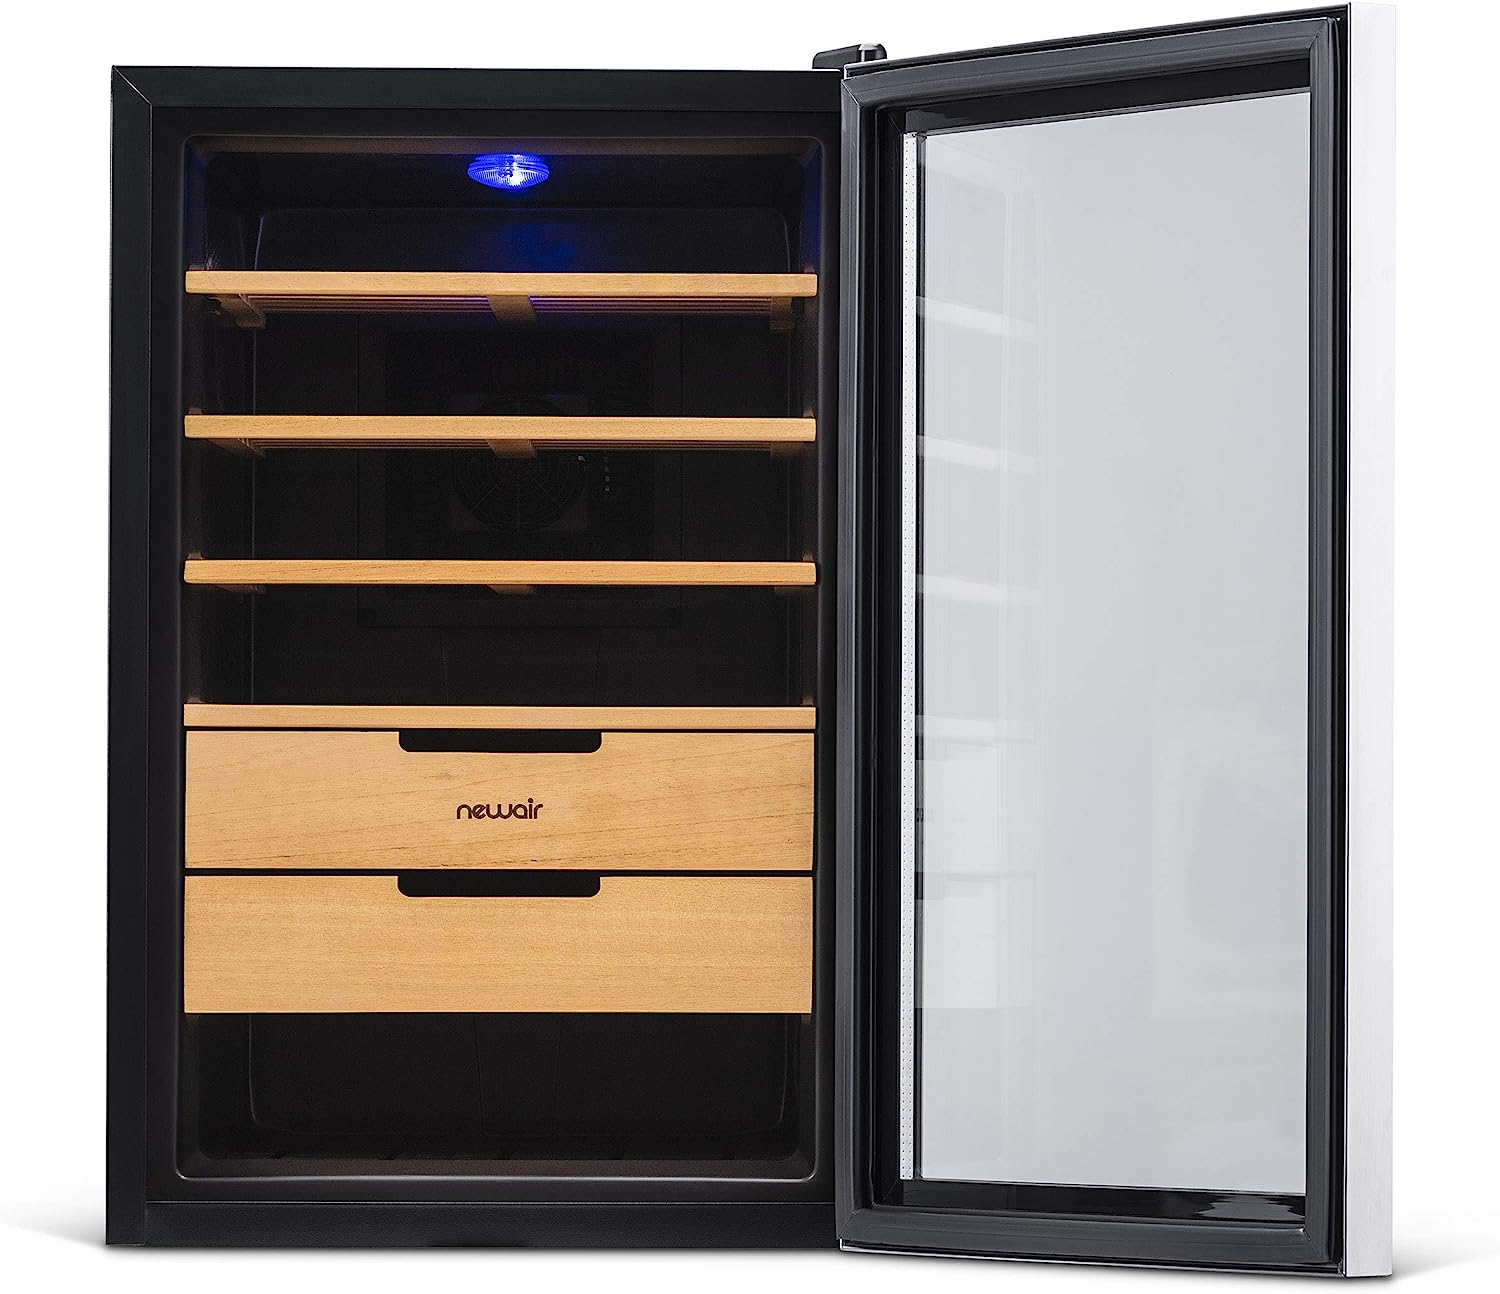 climate-controlled-cigar-humidor-cc-300-stainless steel-4